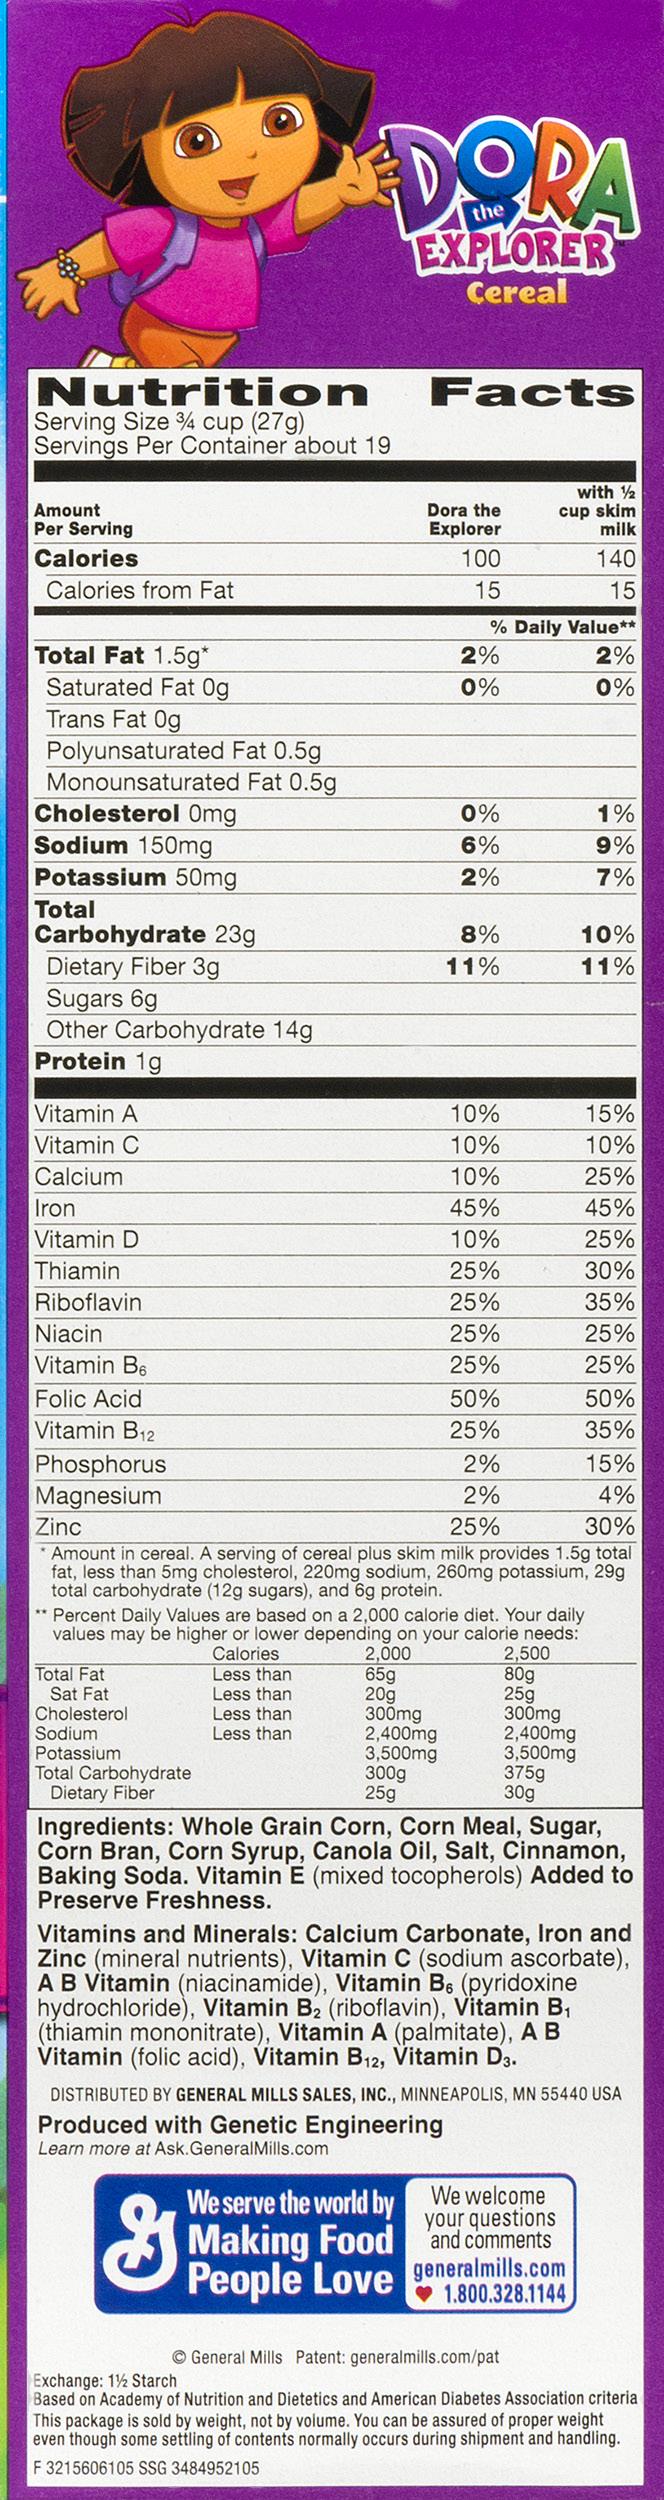 dry ounce. 1) Find the serving size in grams at the top of the label and the sugars listed towards the middle.